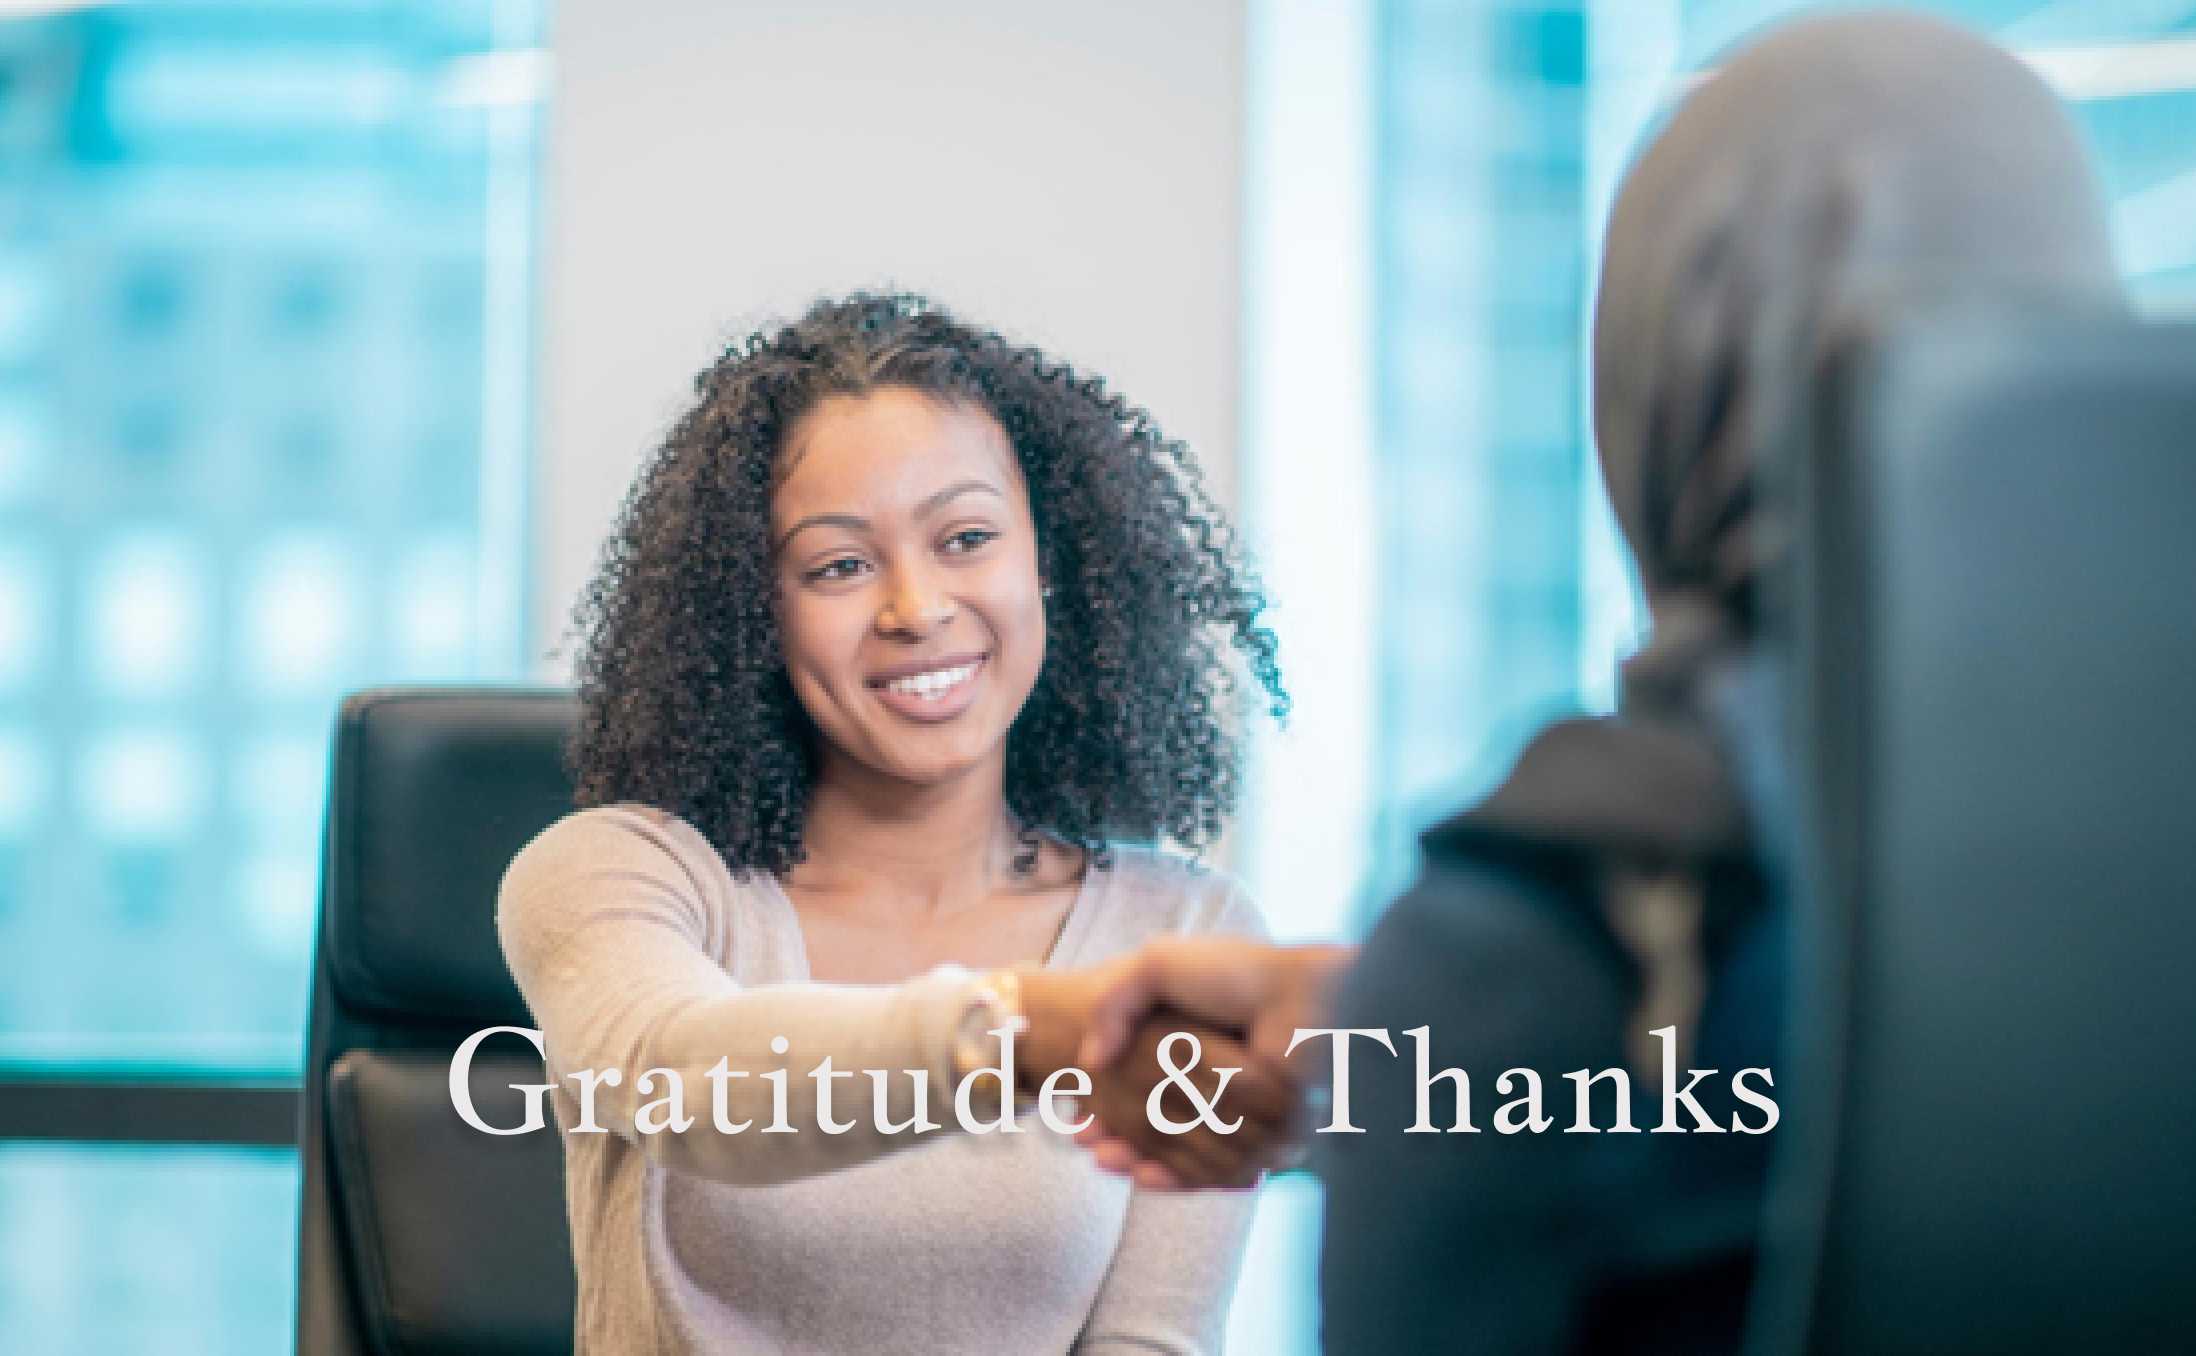 show gratitude in thanksgiving message to clients